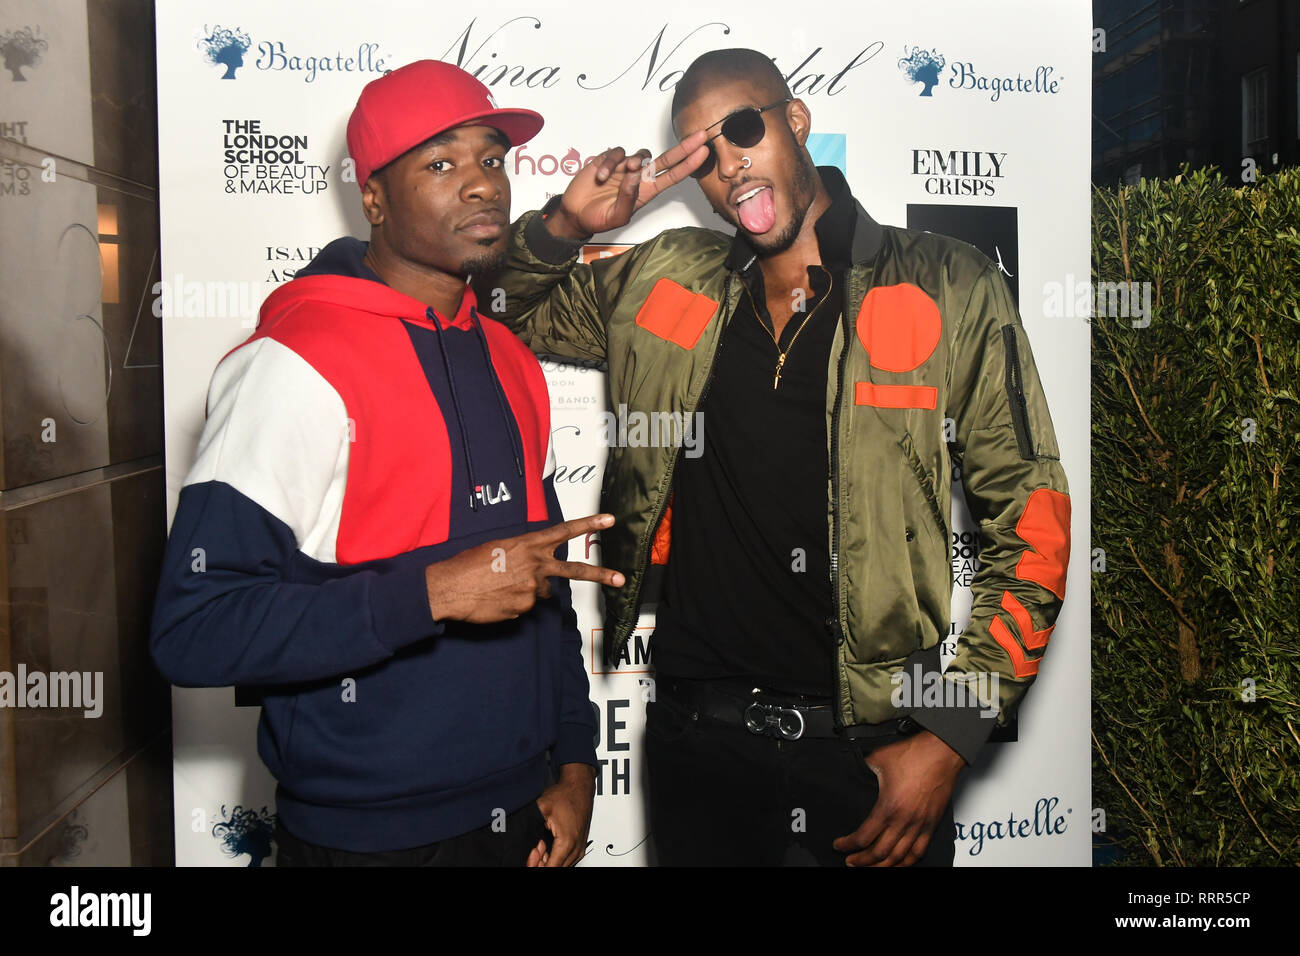 London, UK. 26th Feb 2019. D-Jukes ,Stefan-Pierre Tomlin Arrivers at Nina Naustdal catwalk show SS19/20 collection by The London School of Beauty & Make-up at Bagatelle on 26 Feb 2019, London, UK. Credit: Picture Capital/Alamy Live News Stock Photo